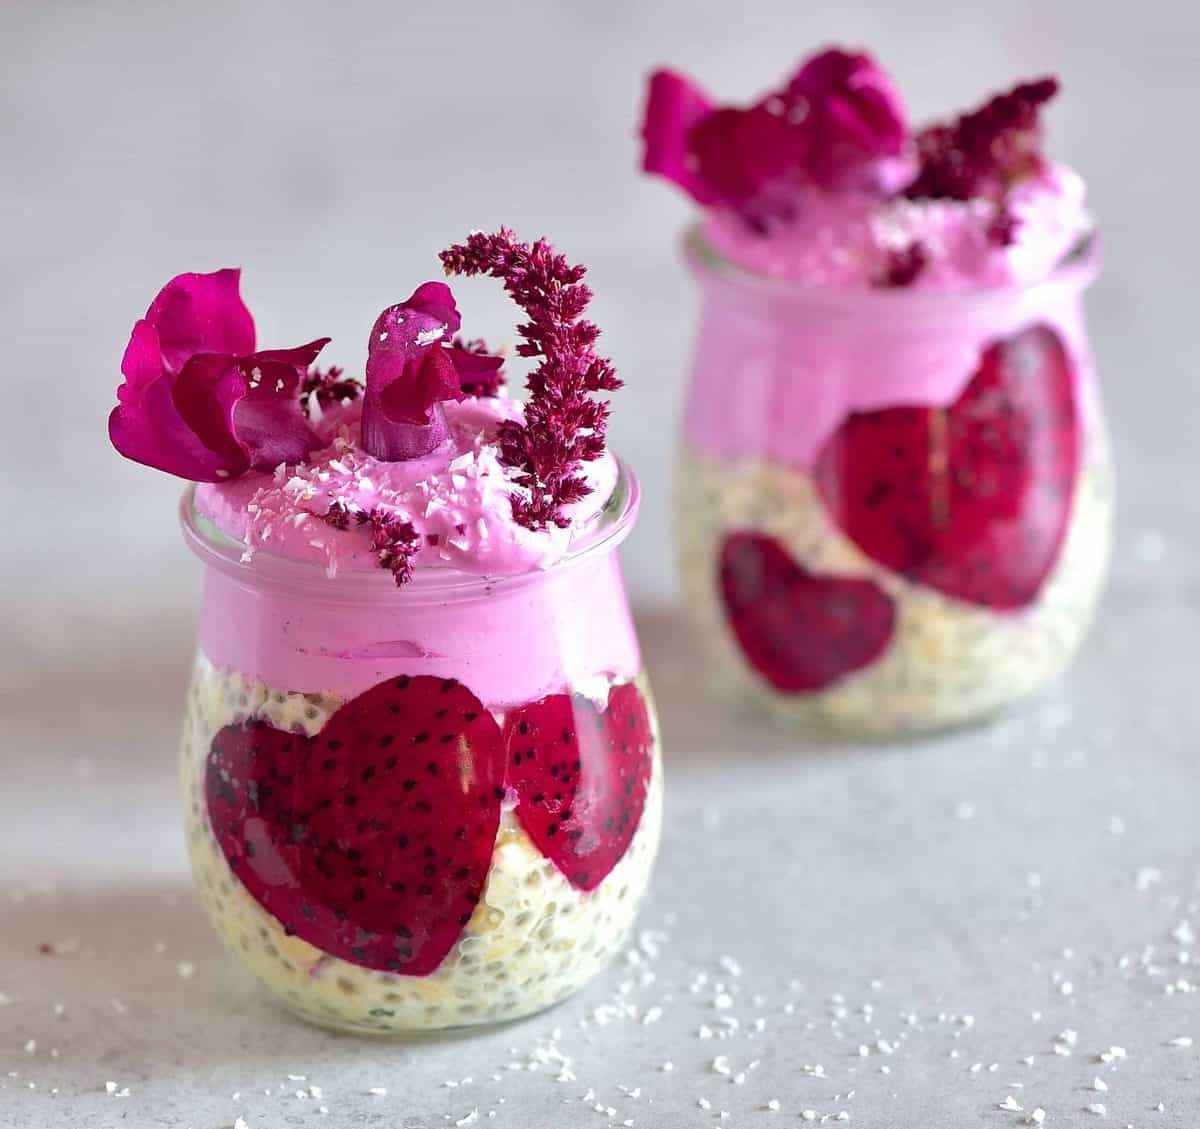 Overnight oats and dragon fruit in a jar